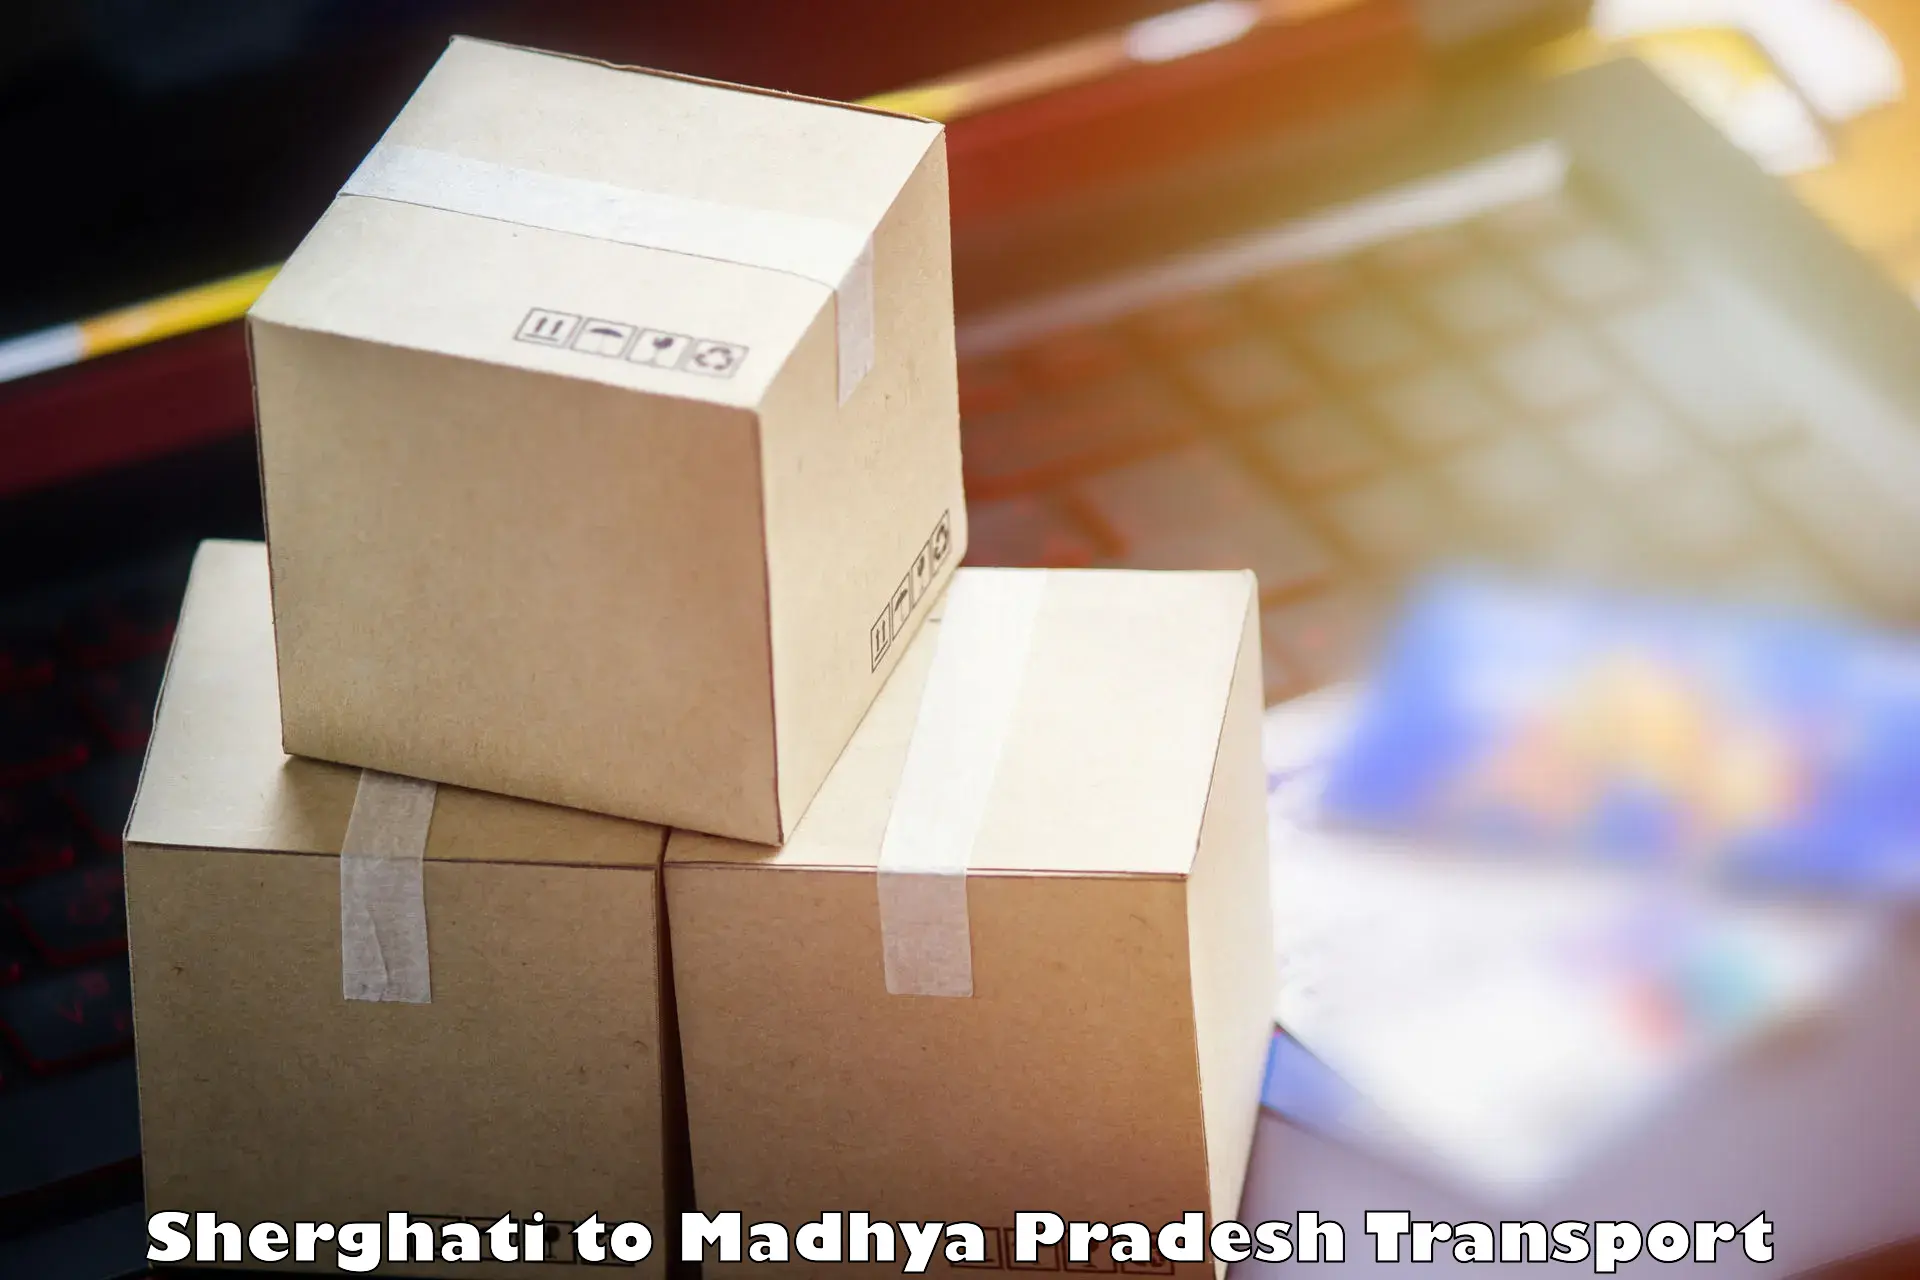 Air freight transport services Sherghati to Sausar